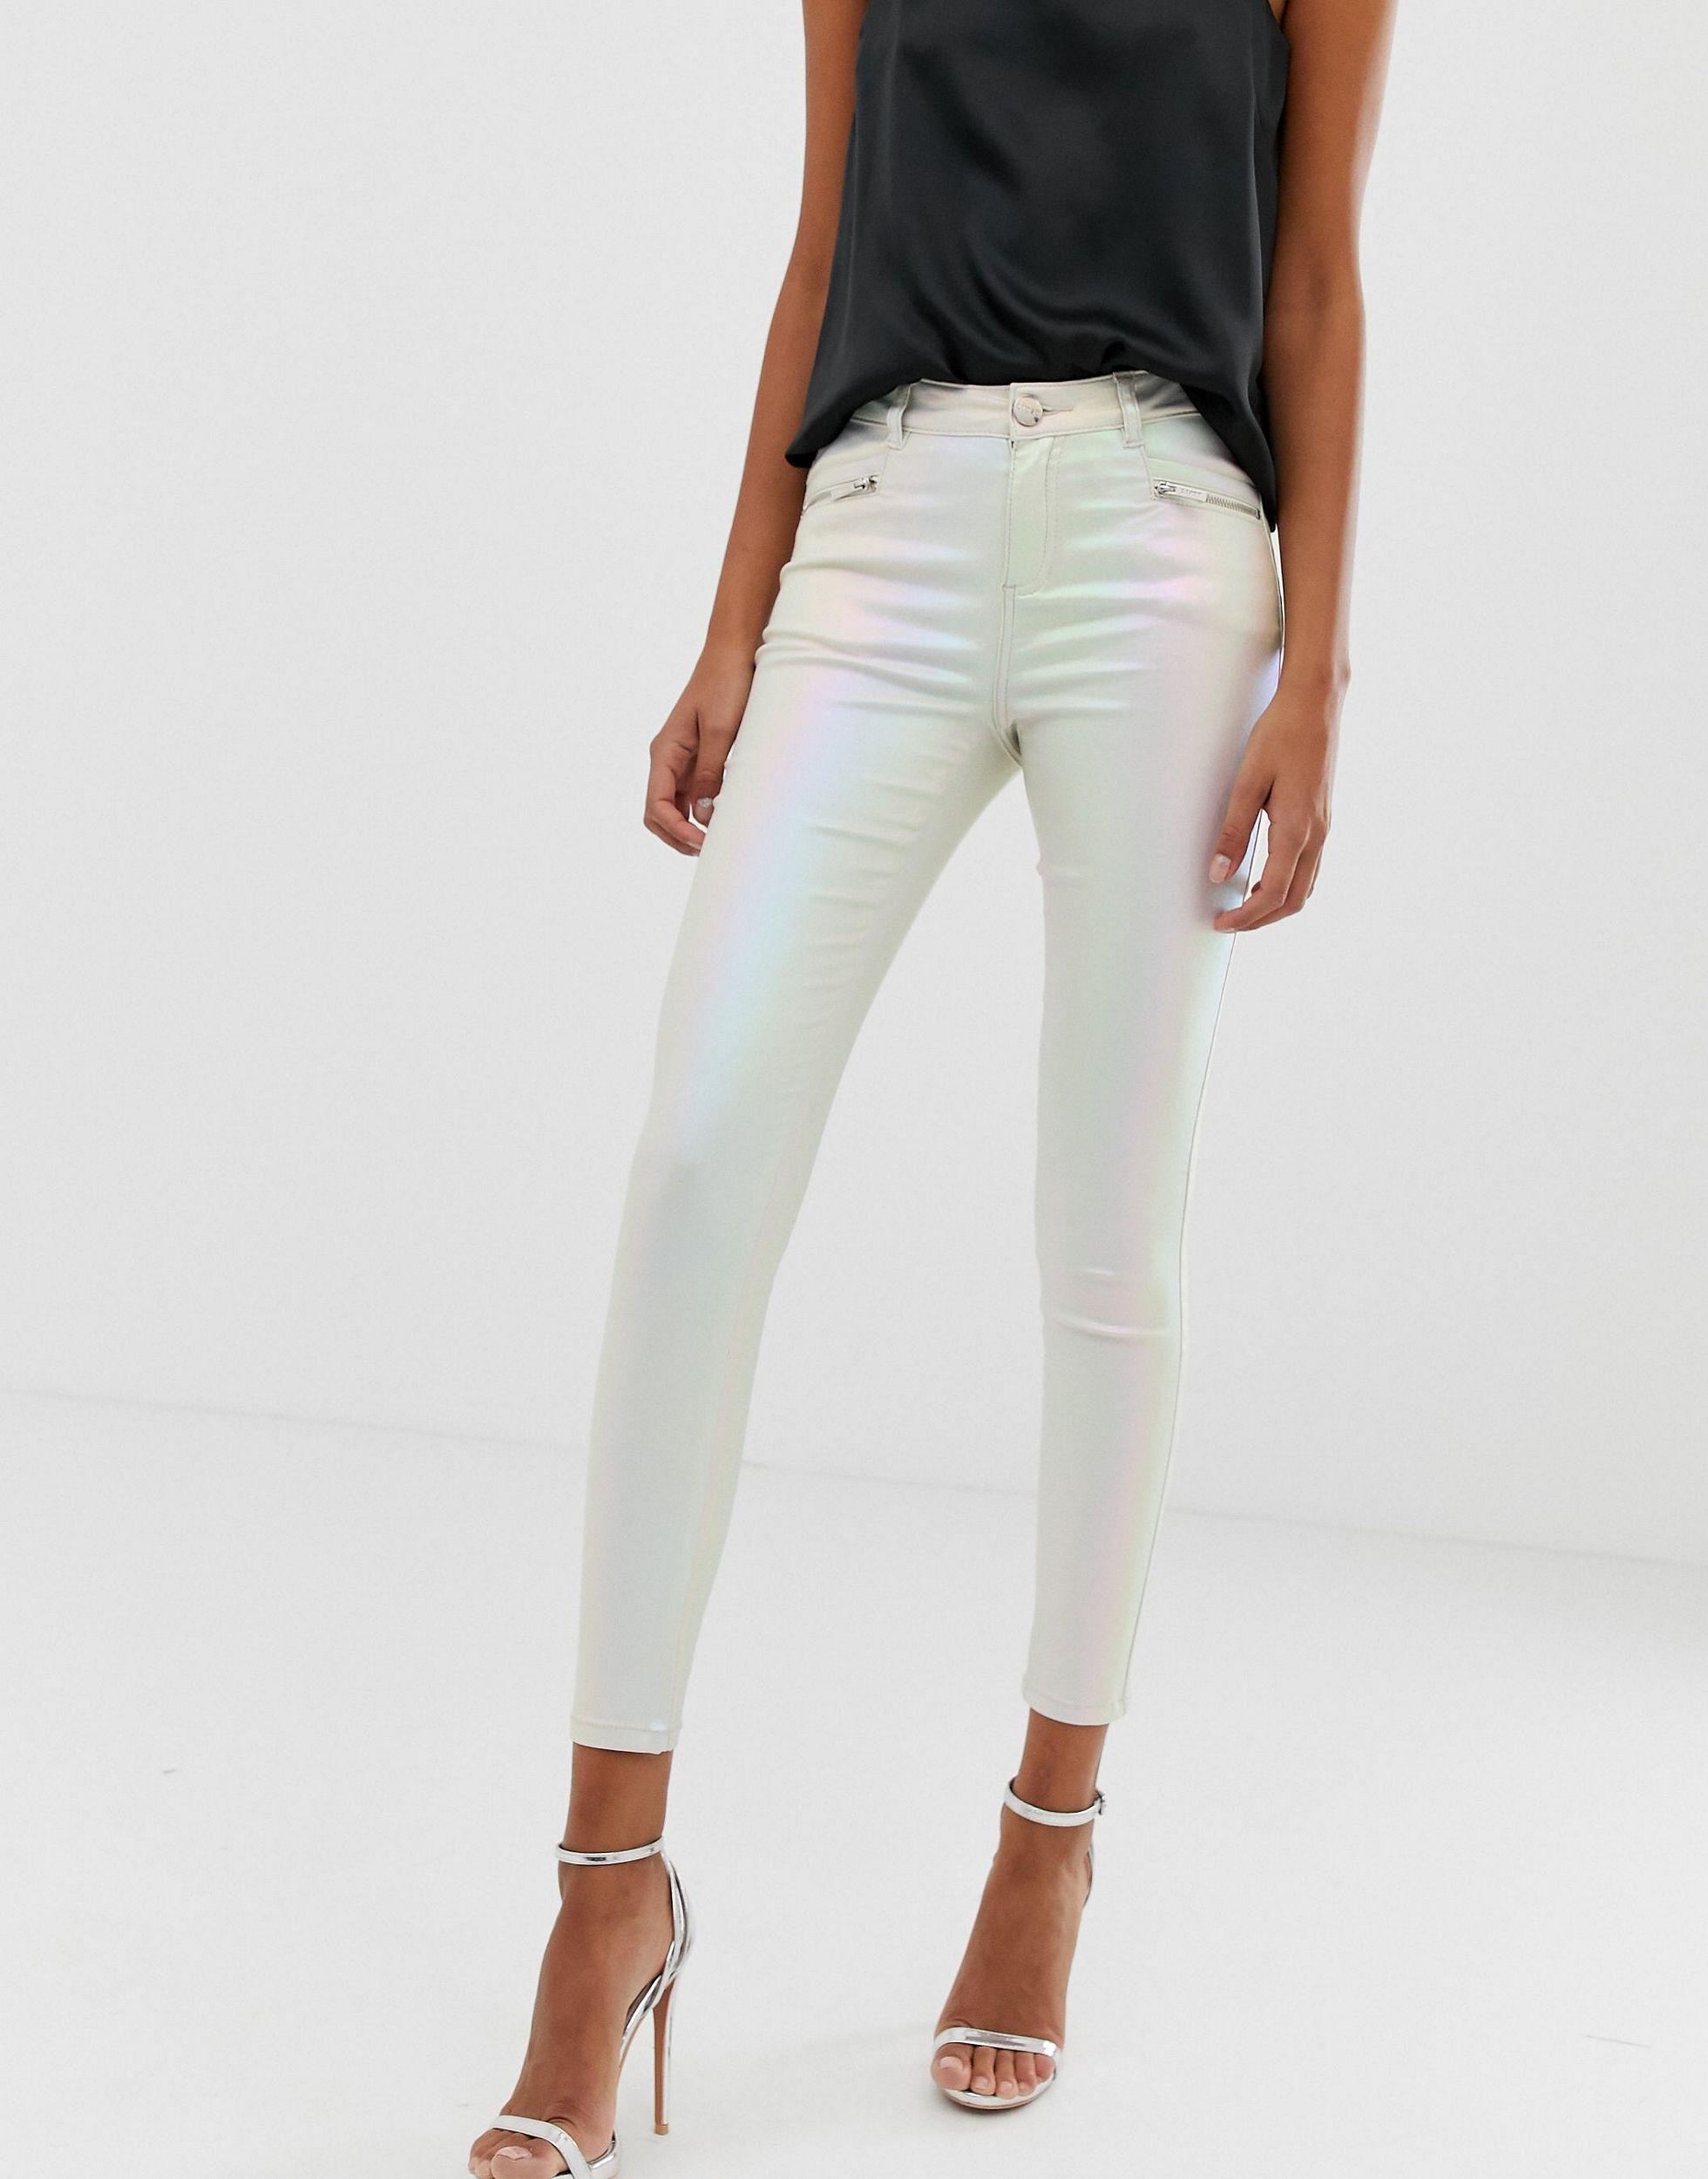 Lipsy Denim Coated Skinny Jeans In Pearlescent Cream - Lyst